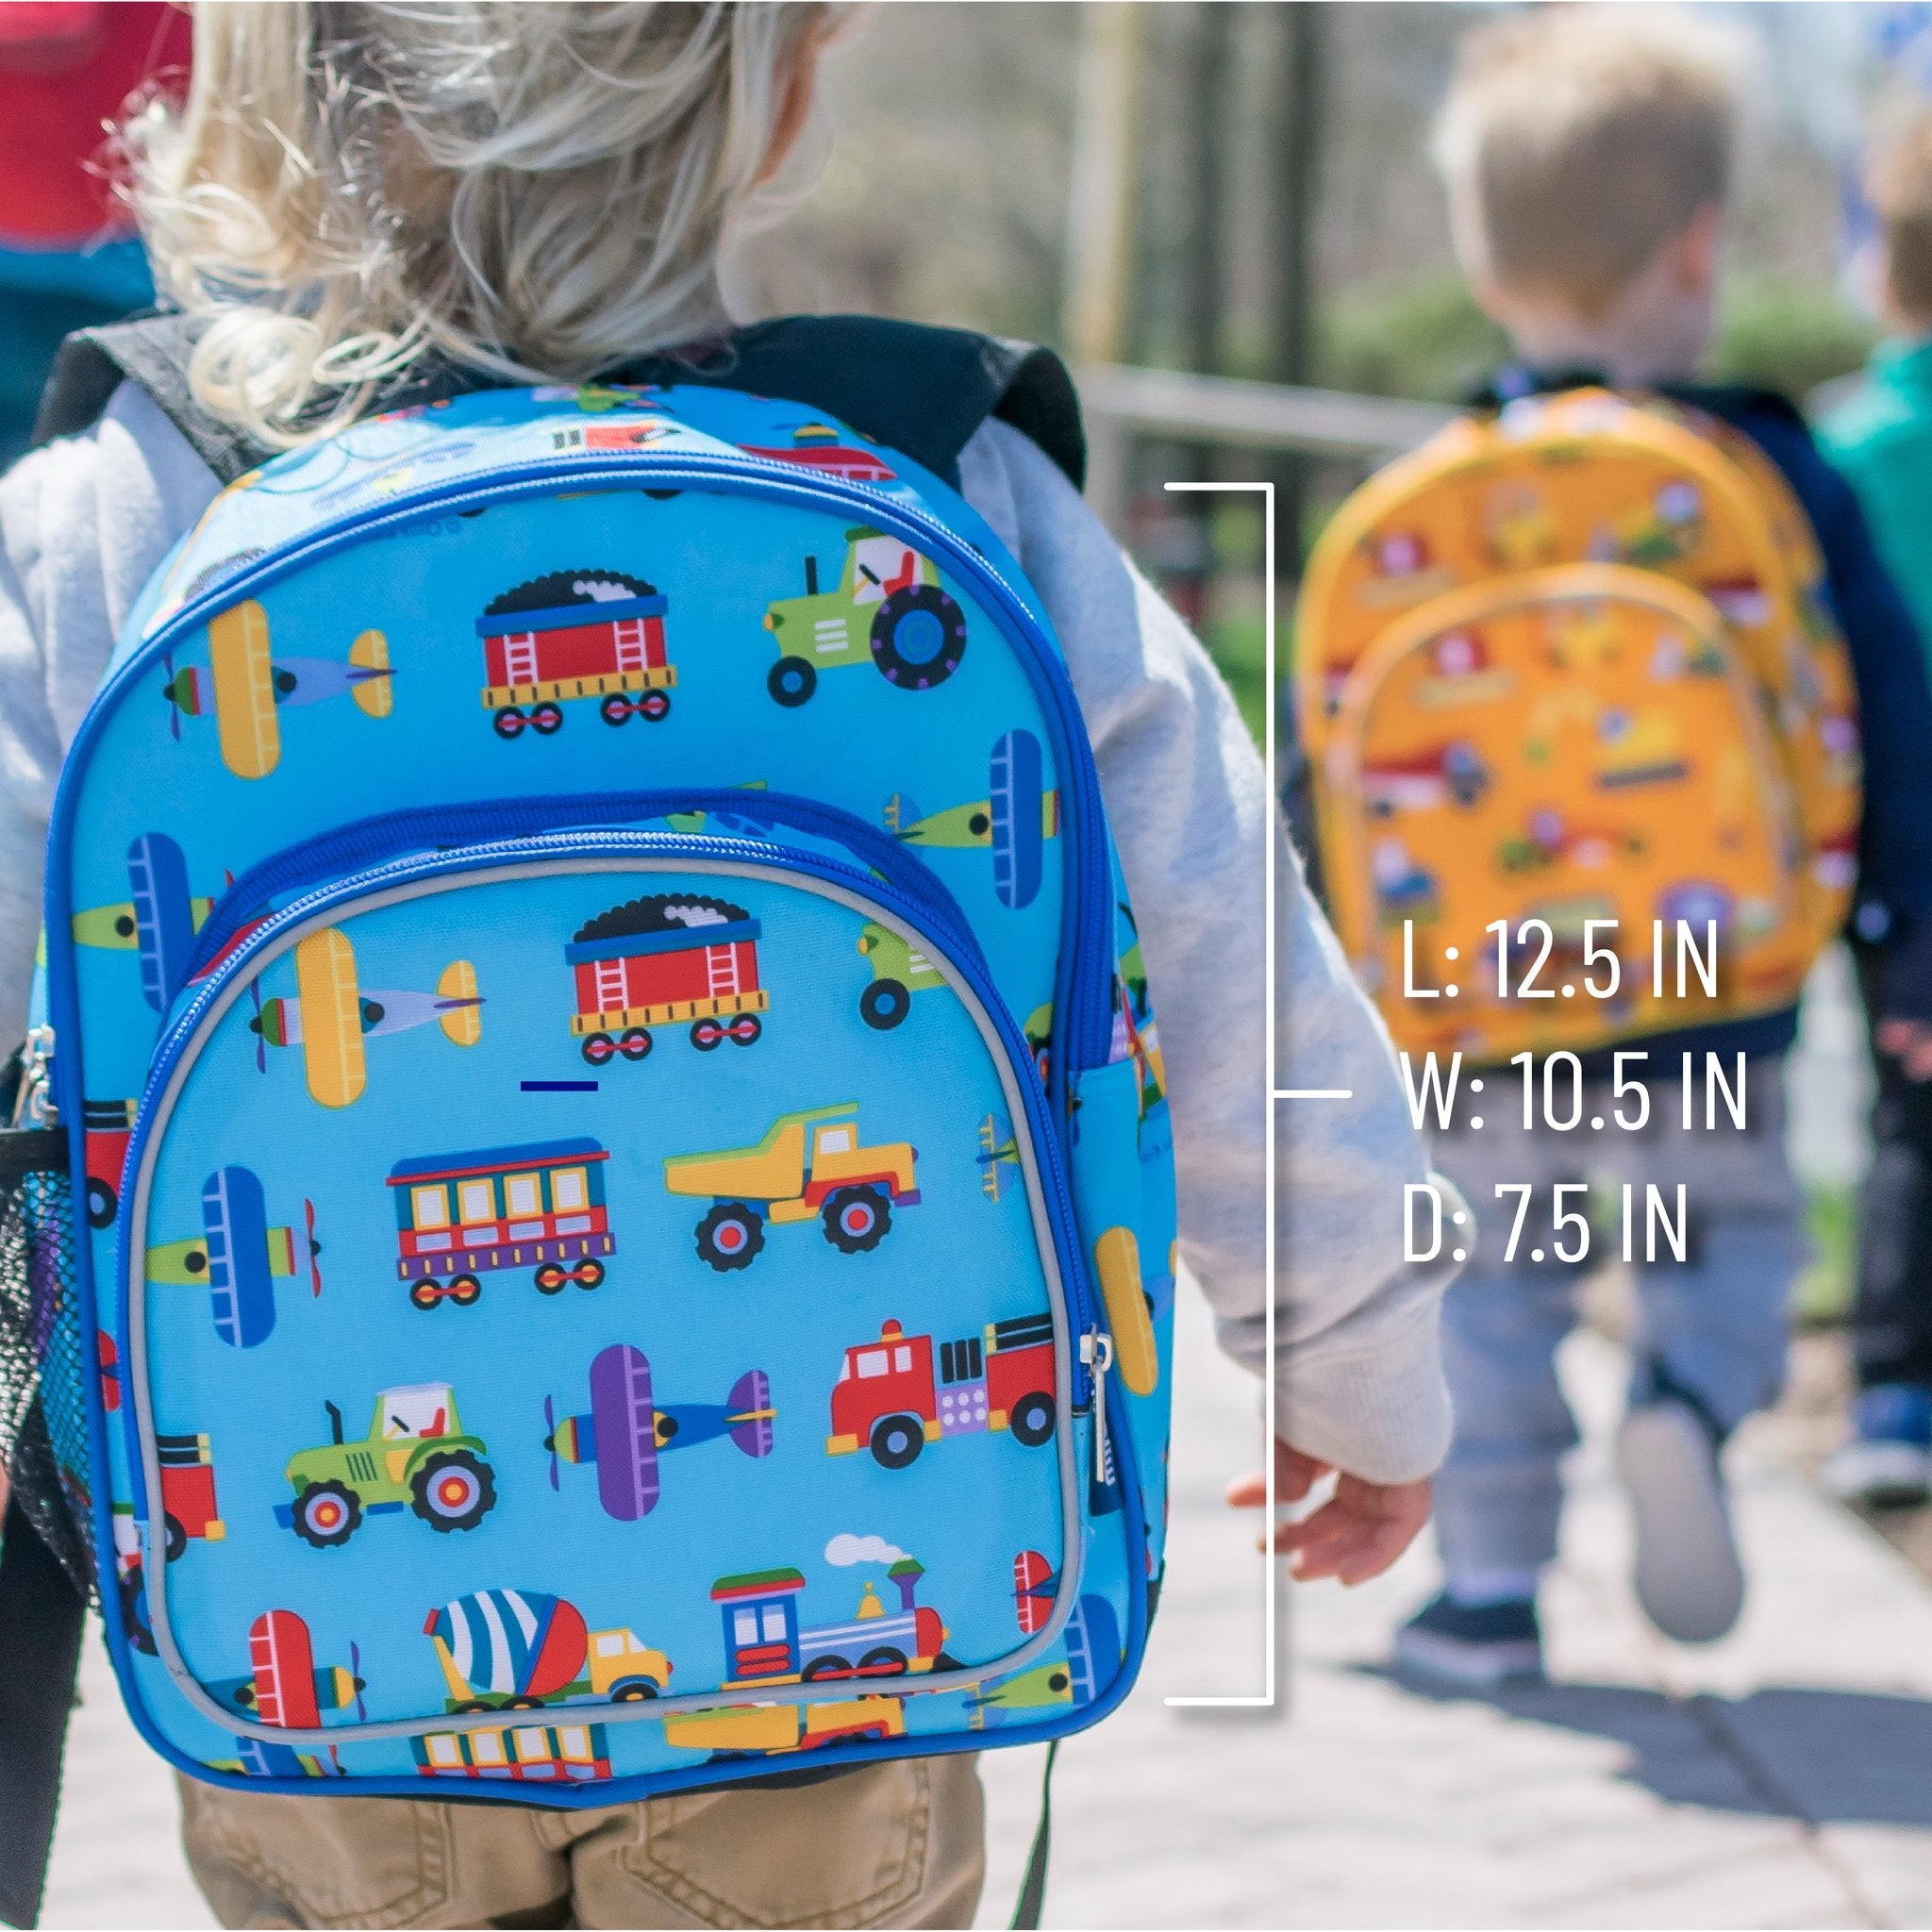 Wildkin Kids Insulated Lunch Box Bag (trains, Planes And Trucks